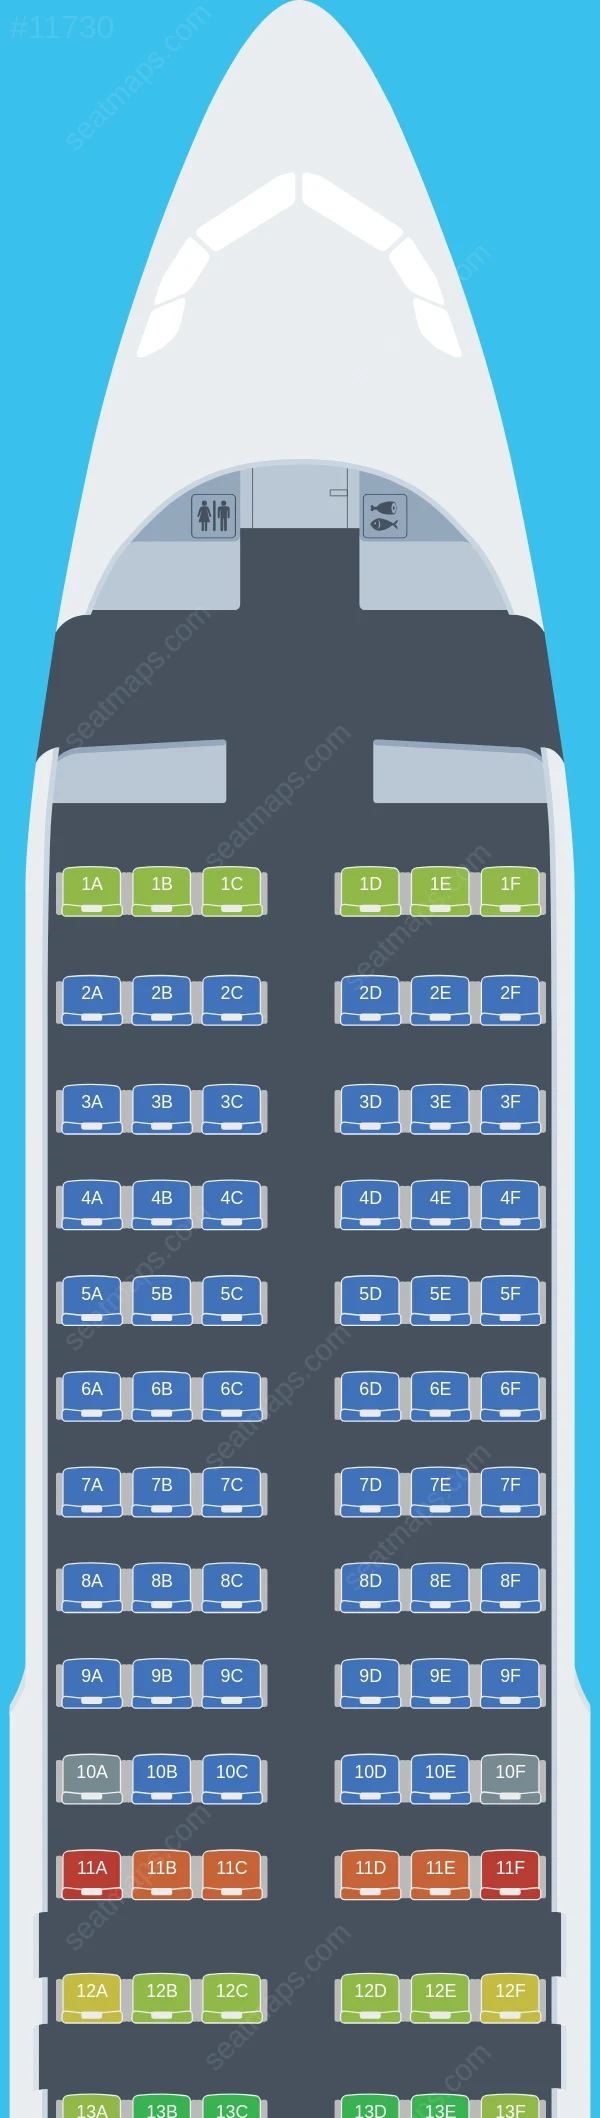 West Air Airbus A320neo seatmap preview